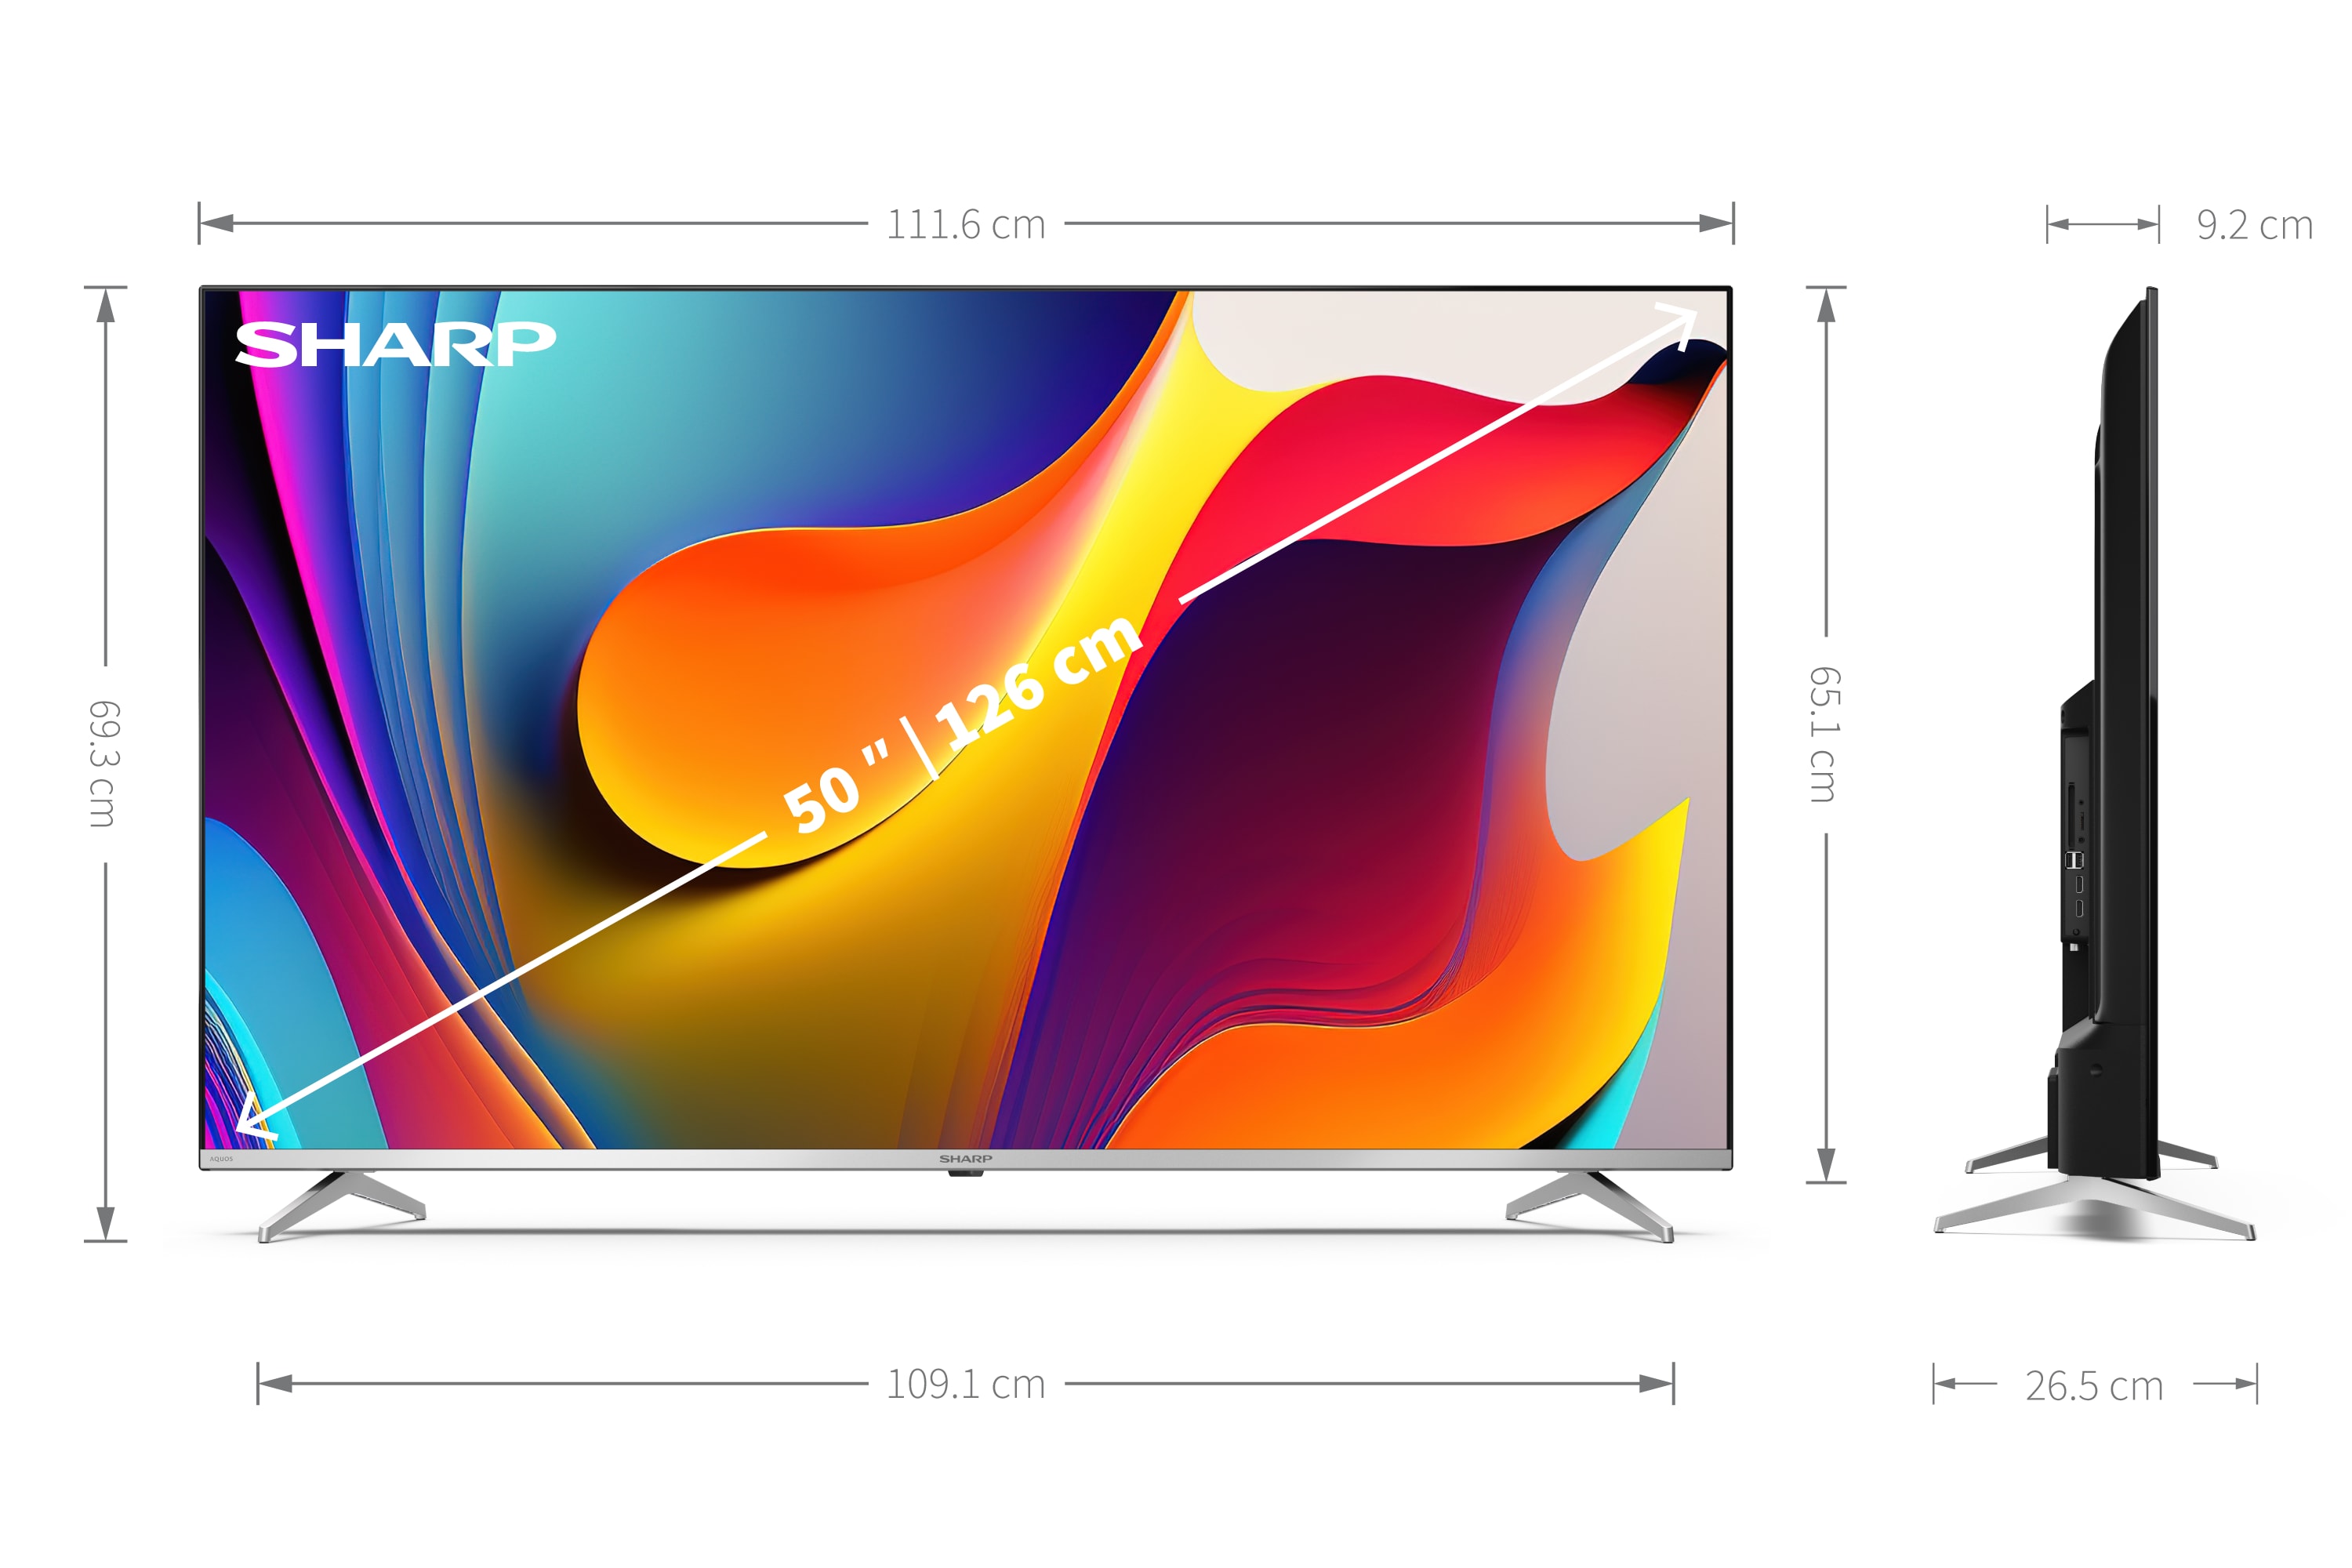 Android TV 4K UHD - ANDROID TV™ SHARP 50" 4K ULTRA HD QUANTUM DOT